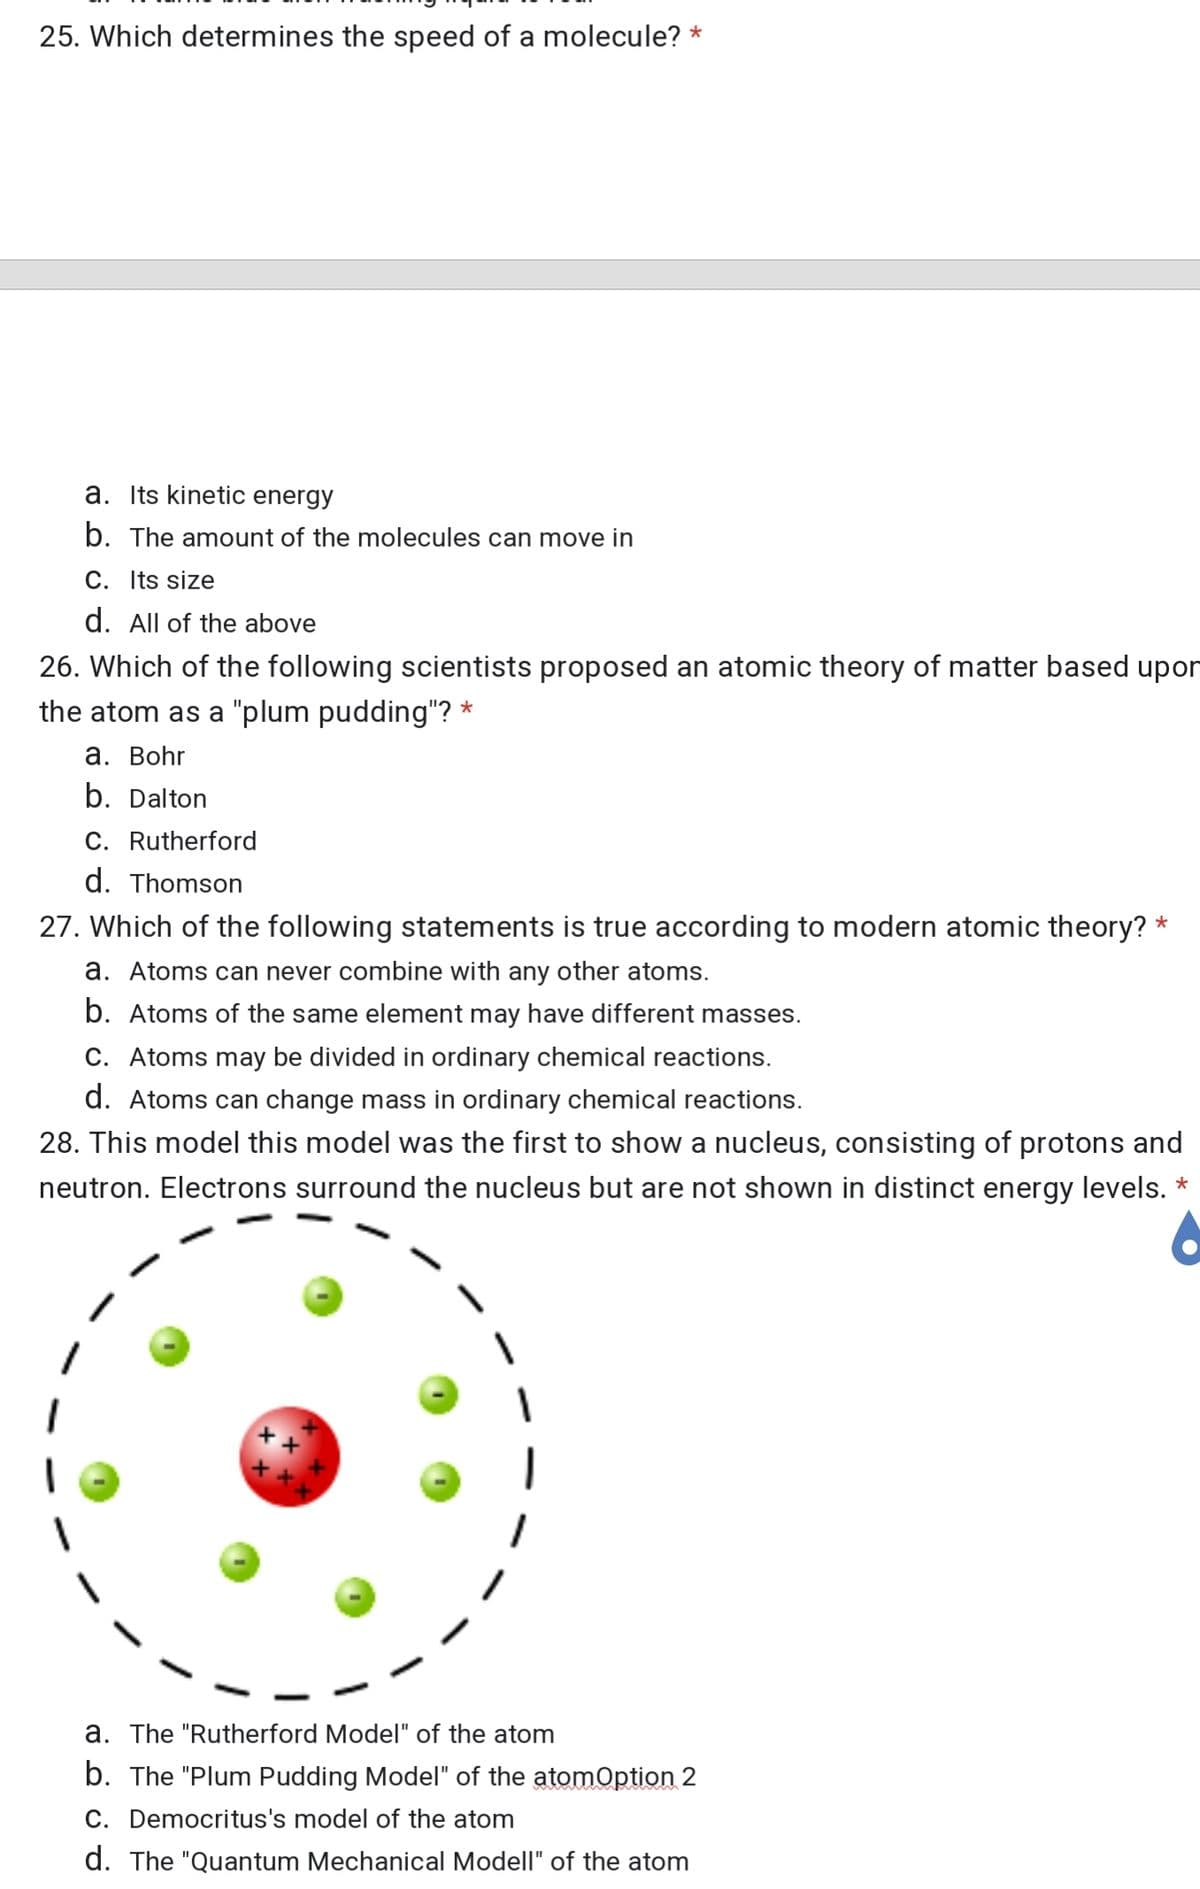 25. Which determines the speed of a molecule? *
a. Its kinetic energy
b. The amount of the molecules can move in
C. Its size
d. All of the above
26. Which of the following scientists proposed an atomic theory of matter based upor
the atom as a "plum pudding"? *
а. Bohr
b. Dalton
C. Rutherford
d. Thomson
27. Which of the following statements is true according to modern atomic theory? *
a. Atoms can never combine with any other atoms.
b. Atoms of the same element may have different masses.
C. Atoms may be divided in ordinary chemical reactions.
d. Atoms can change mass in ordinary chemical reactions.
28. This model this model was the first to show a nucleus, consisting of protons and
neutron. Electrons surround the nucleus but are not shown in distinct energy levels. *
a. The "Rutherford Model" of the atom
b. The "Plum Pudding Model" of the atomOption 2
C. Democritus's model of the atom
d. The "Quantum Mechanical Modell" of the atom
